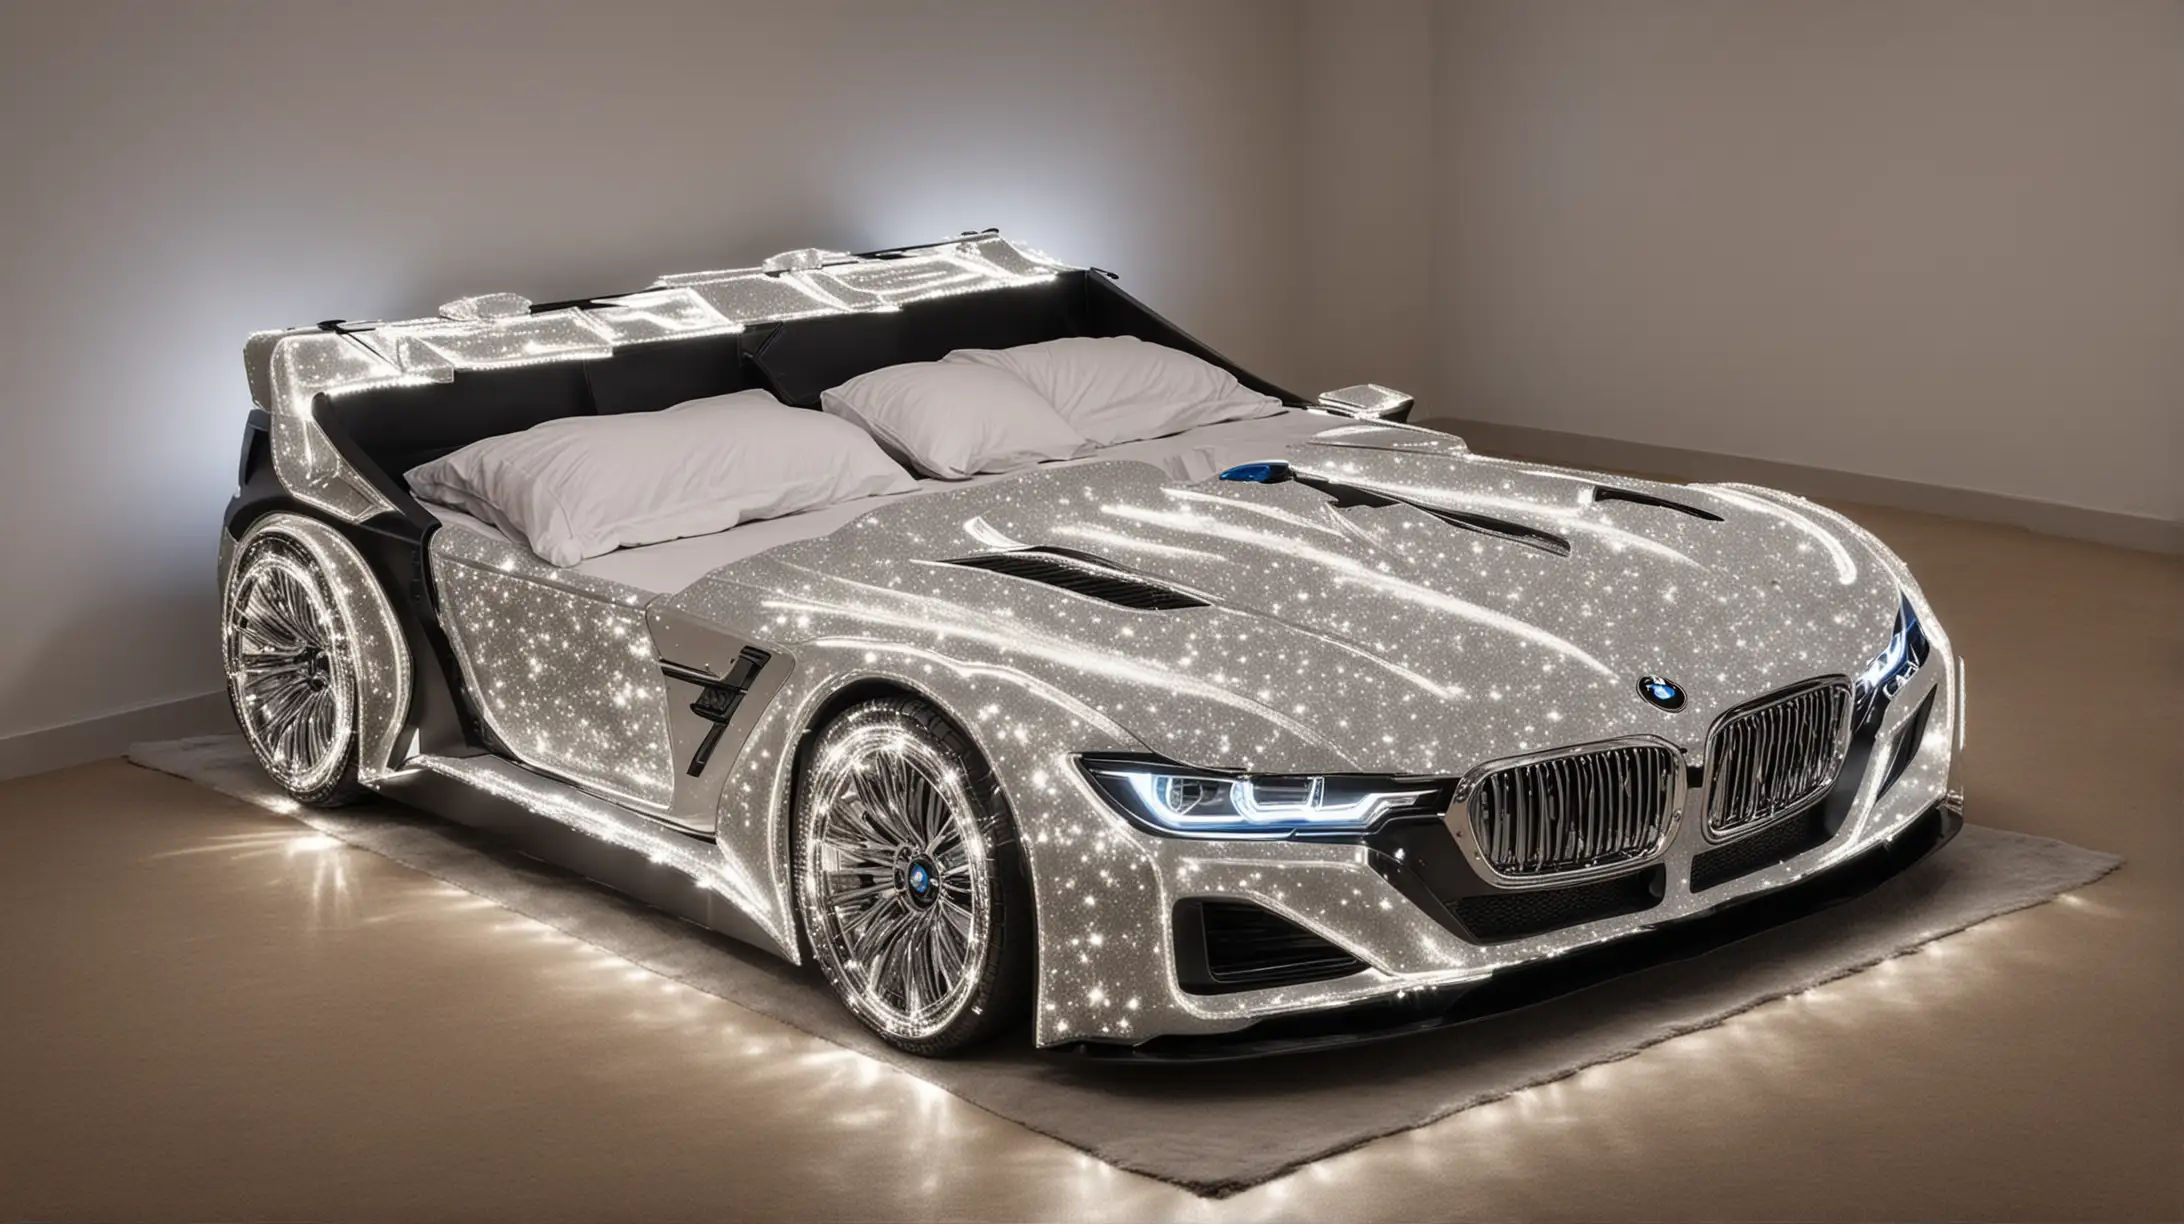 Luxury Double Bed Shaped like BMW Car with Sparkling Headlights